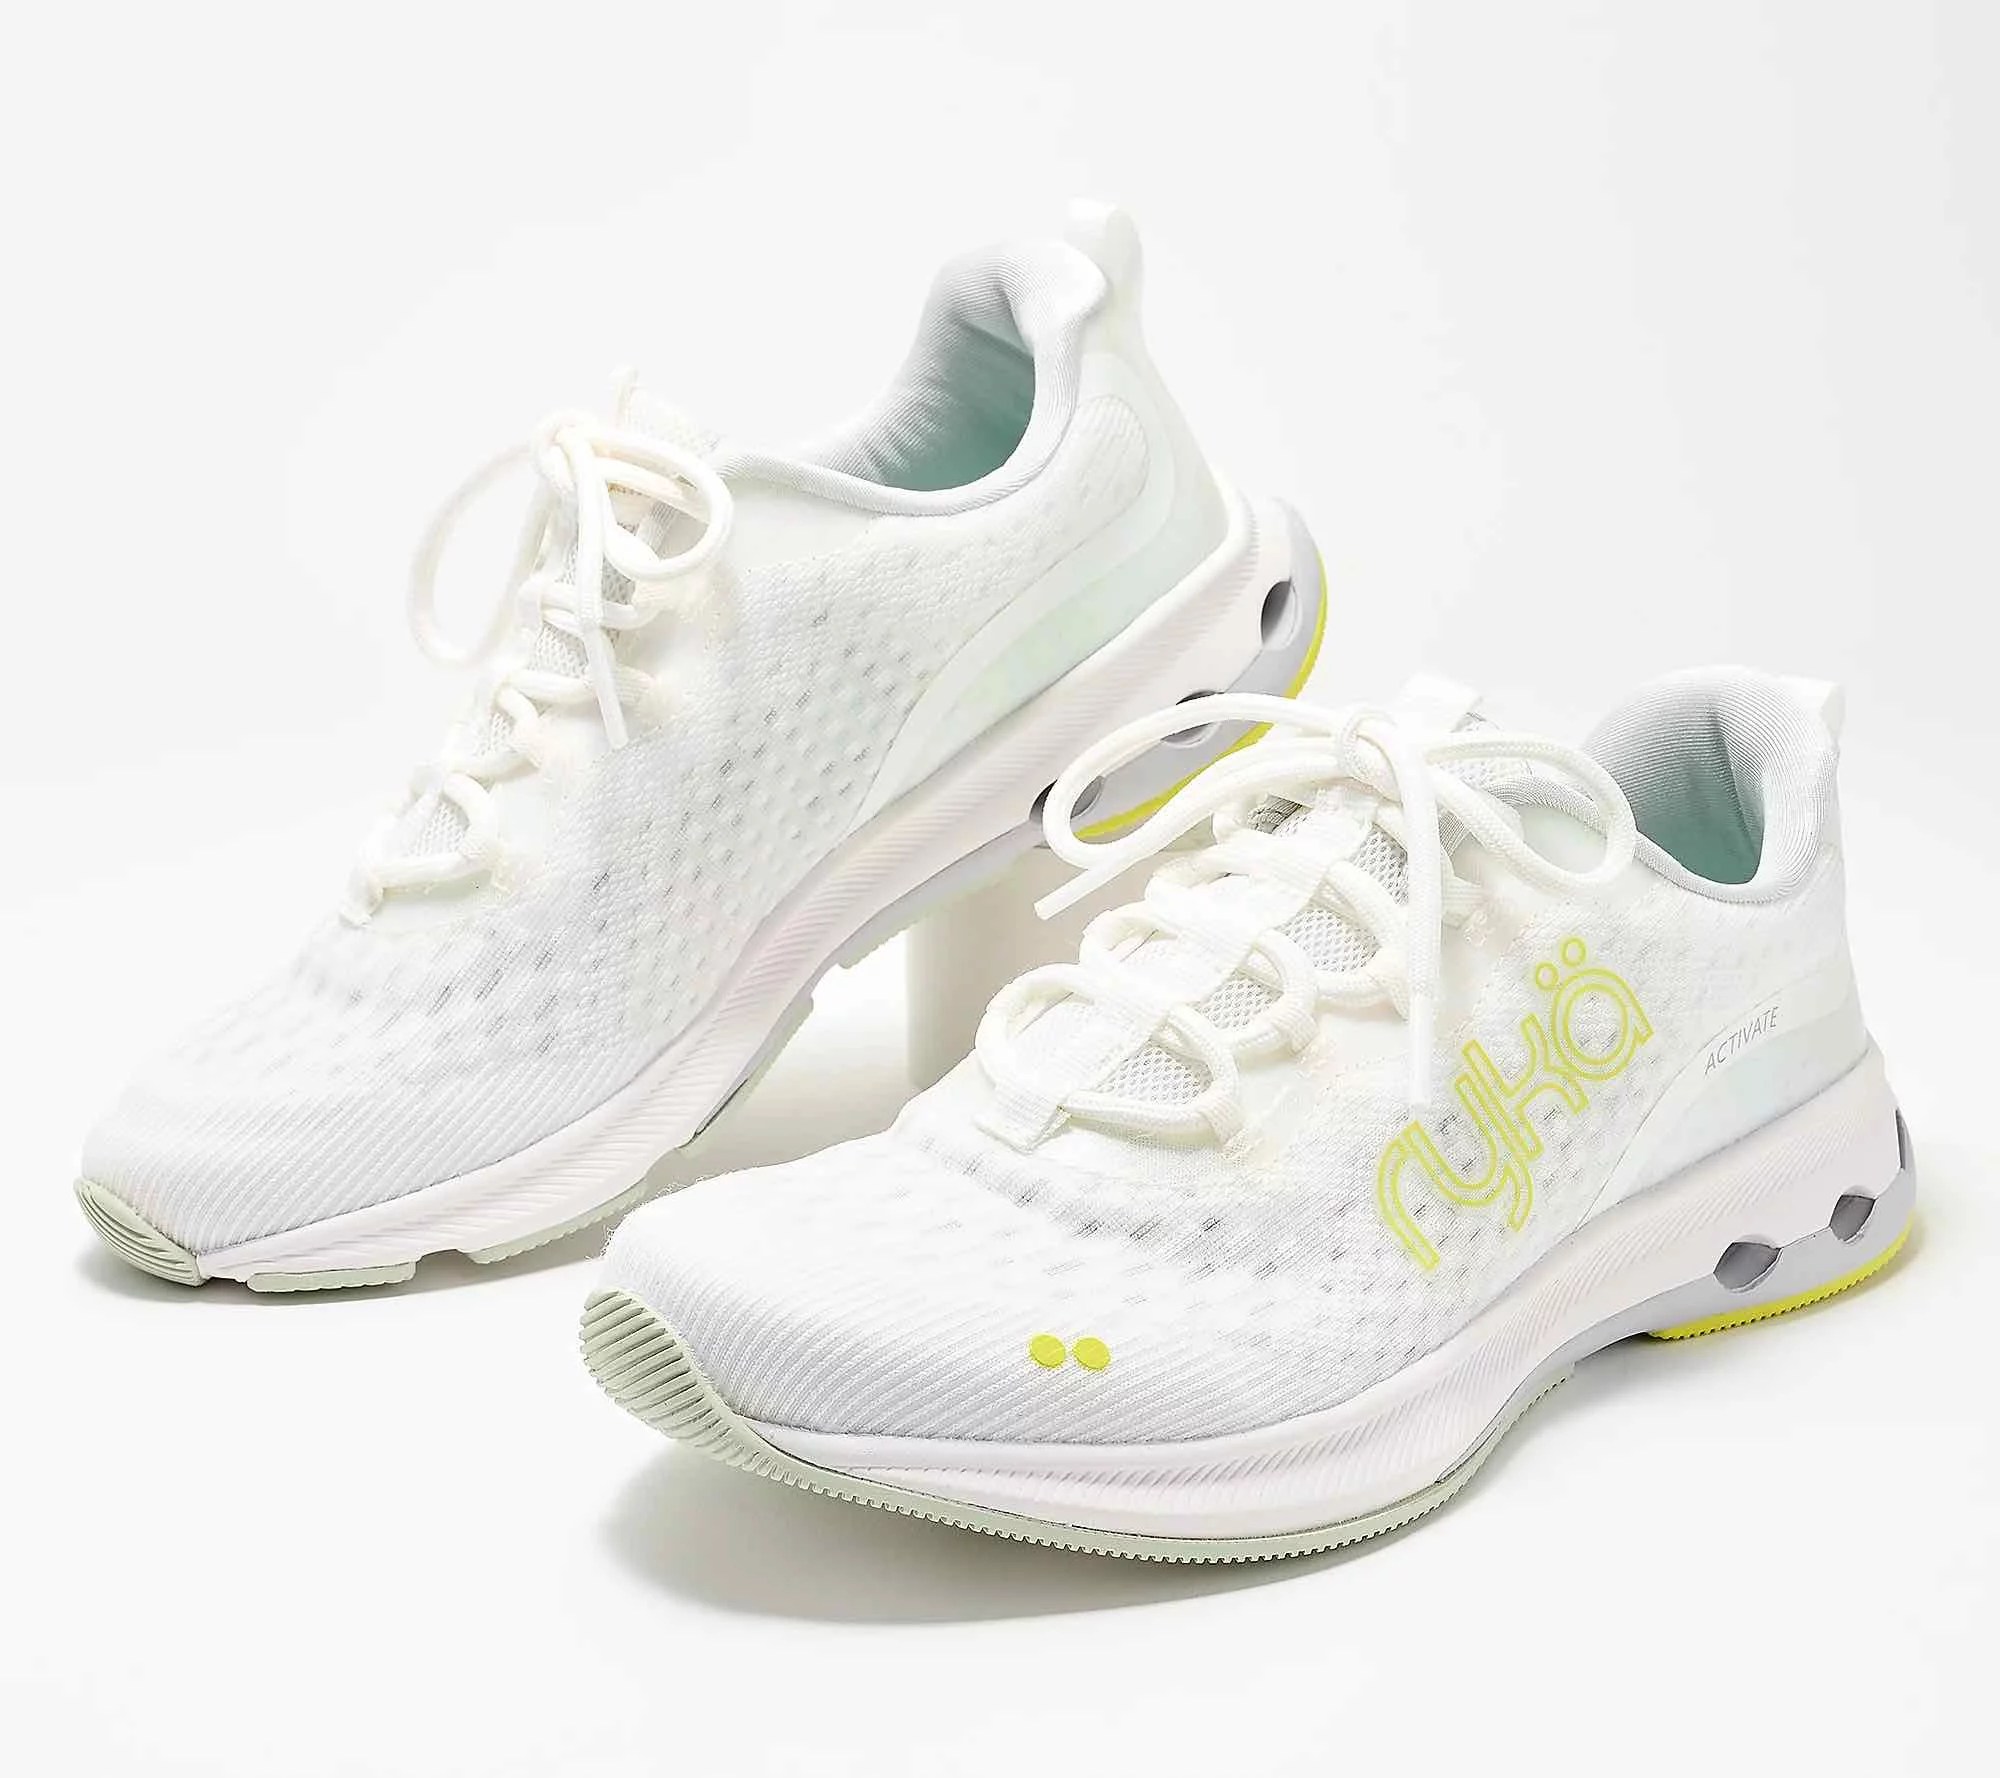 Ryka's Podiatrist-Approved Sneakers Are 30% Off | Well+Good